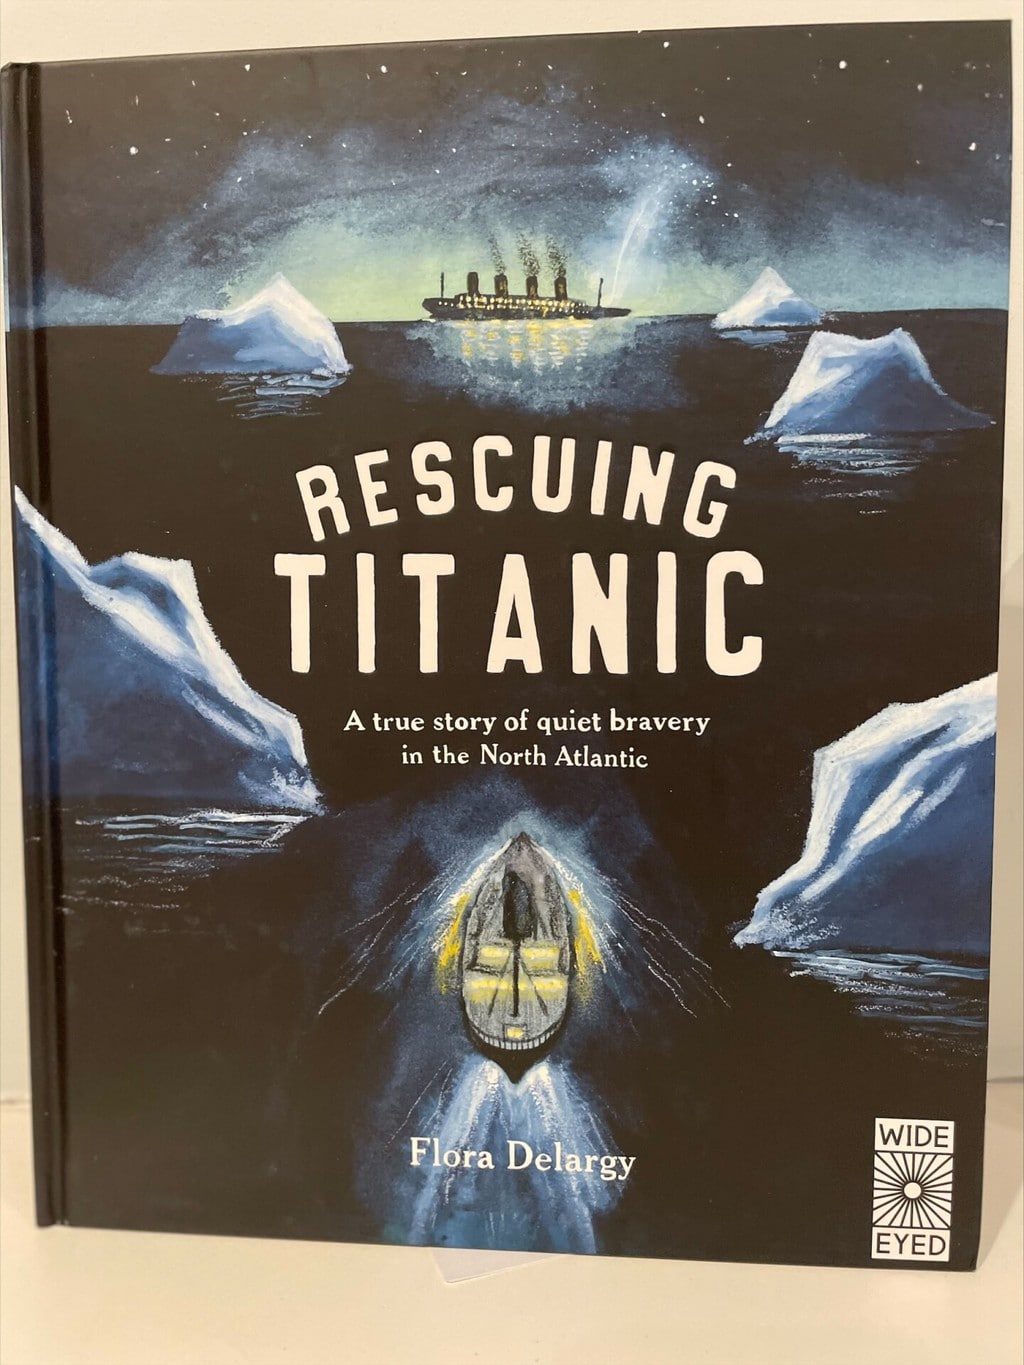 Rescuing Titanic – Flora Delargy (author and illustrator), Wide Eyed Editions (an imprint of Quarto Group) (publisher)